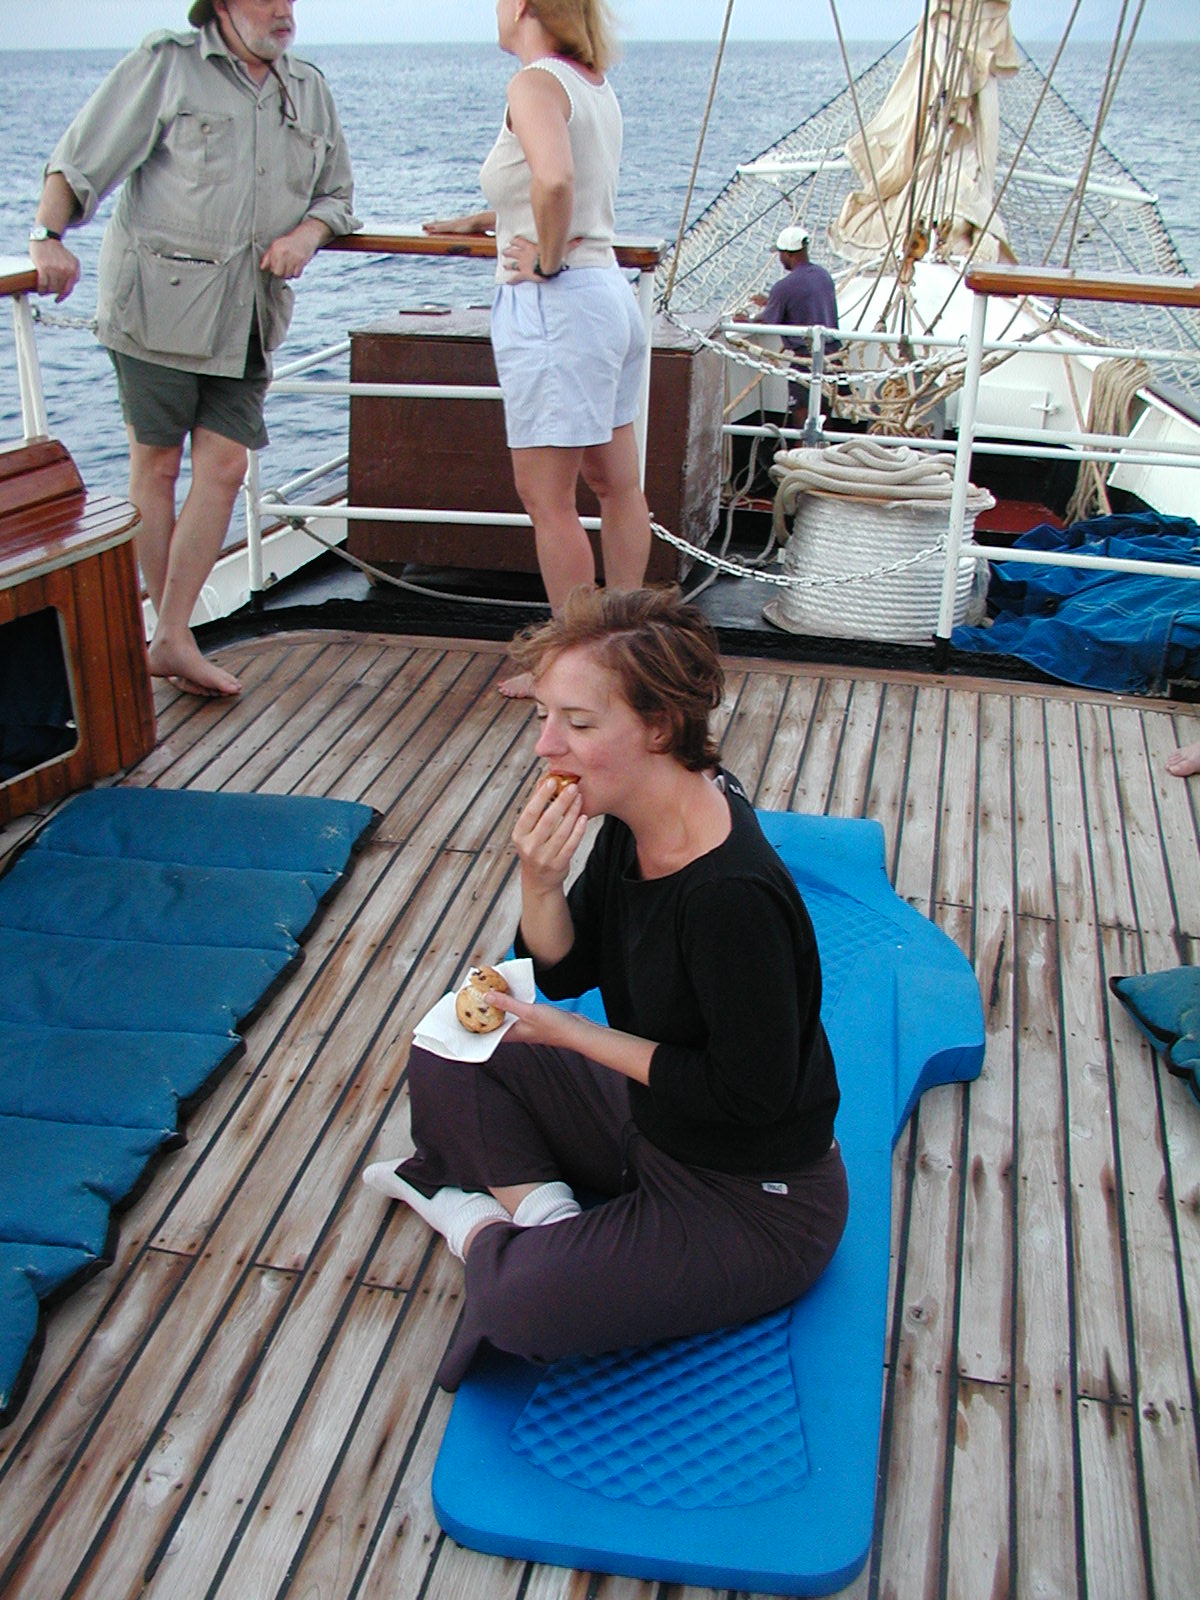 the woman eats on a mat on the deck